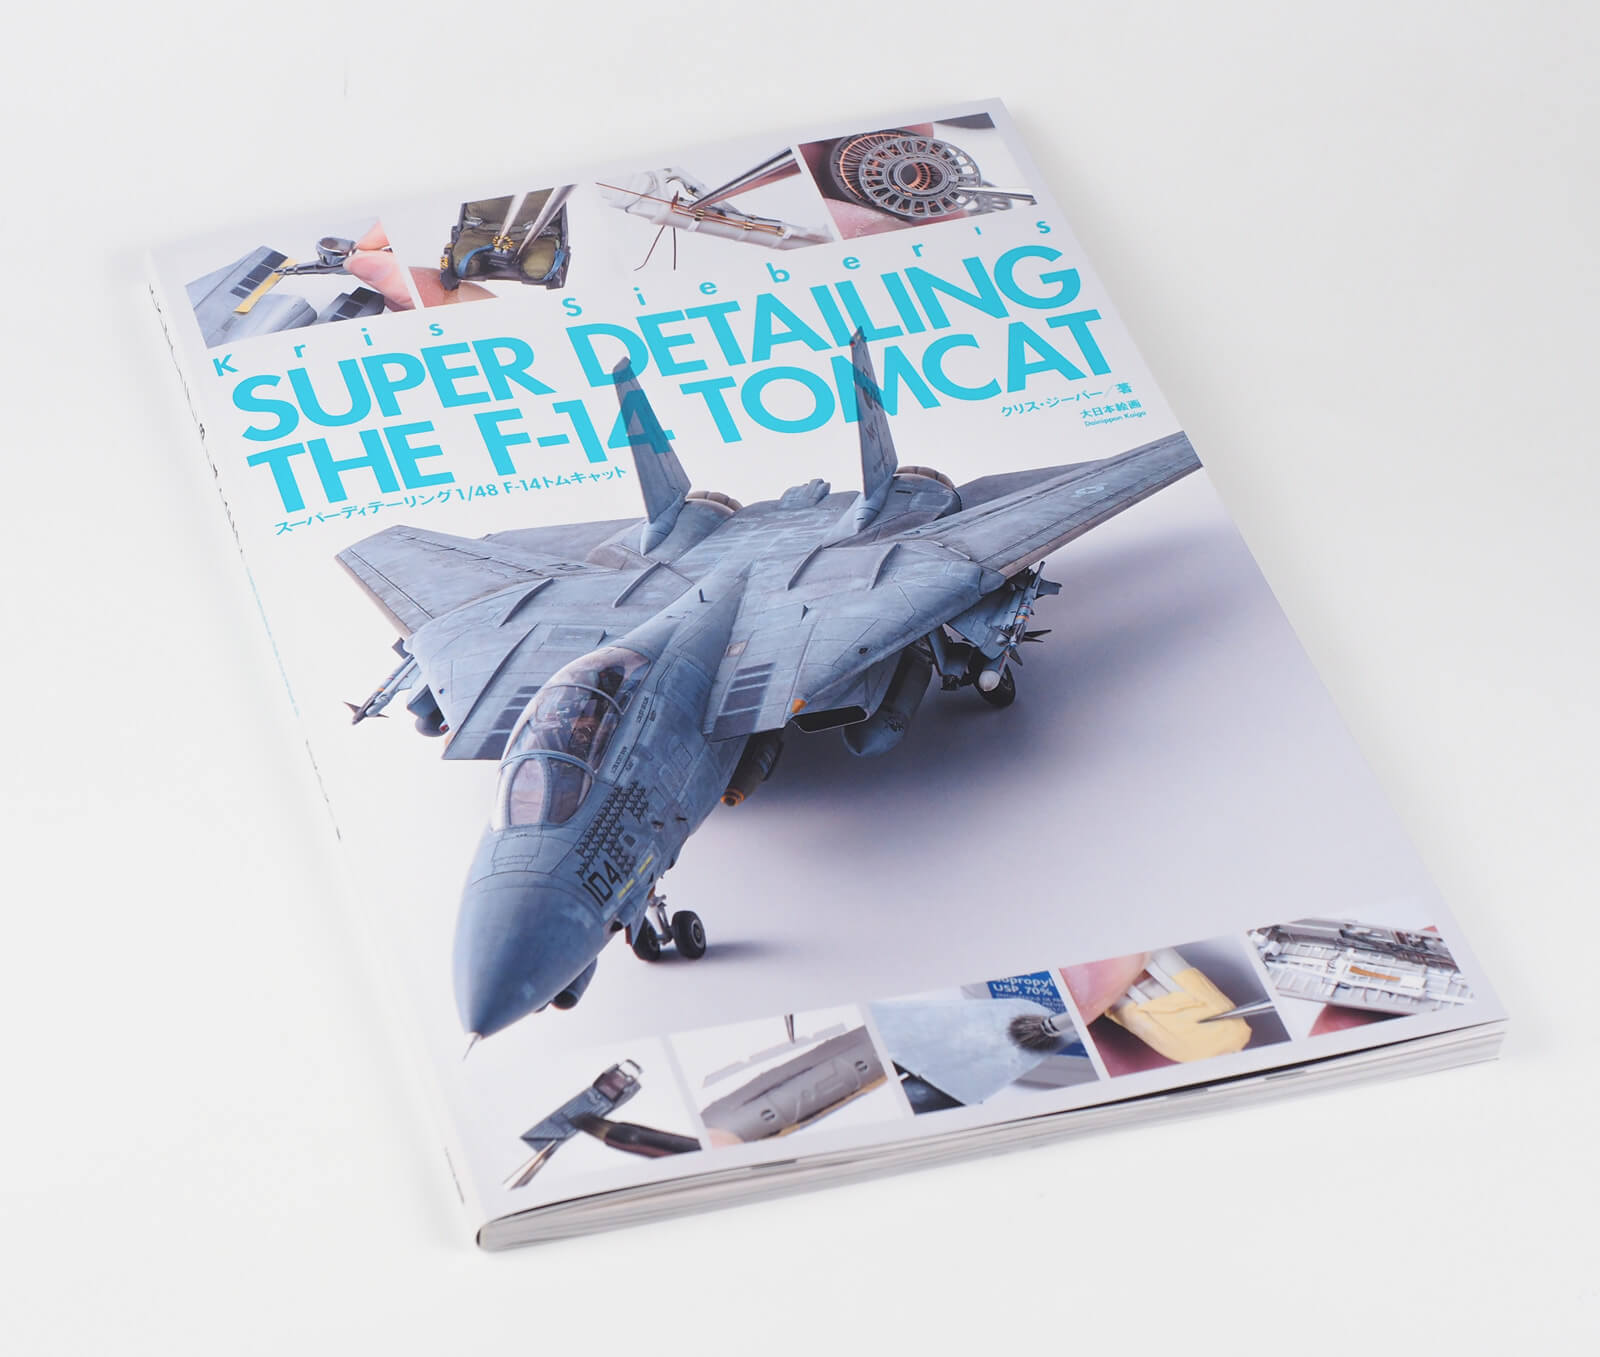 Super Detailing the F-14 Tomcat scale modelling book on white background